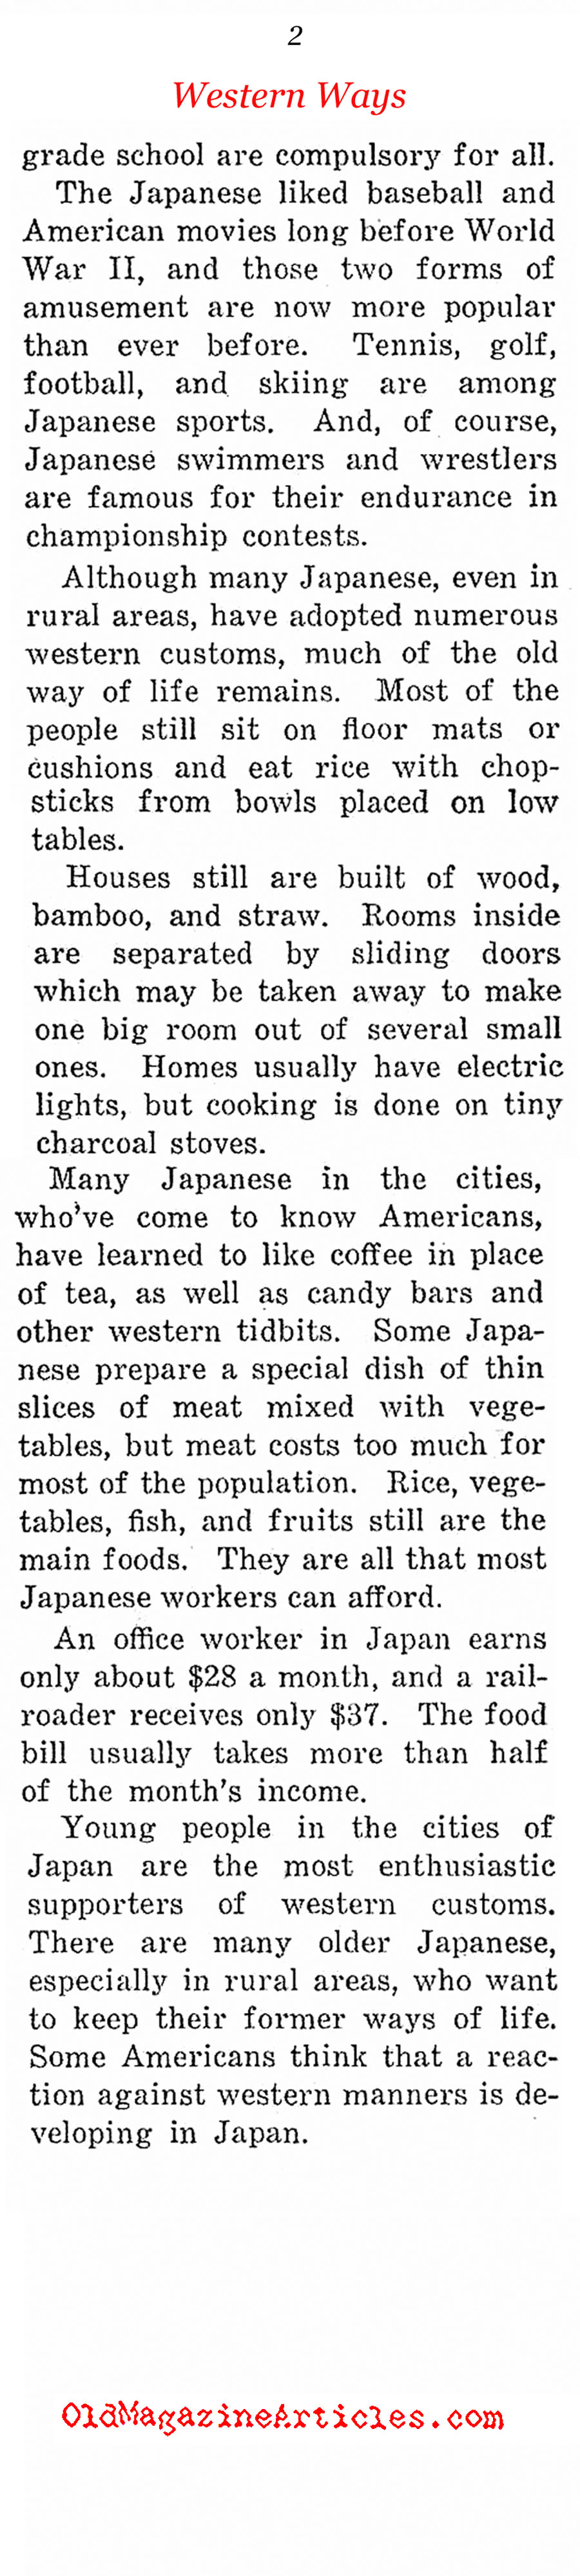 ''The Japanese Try Western Ways'' (Weekly News Review, 1954)